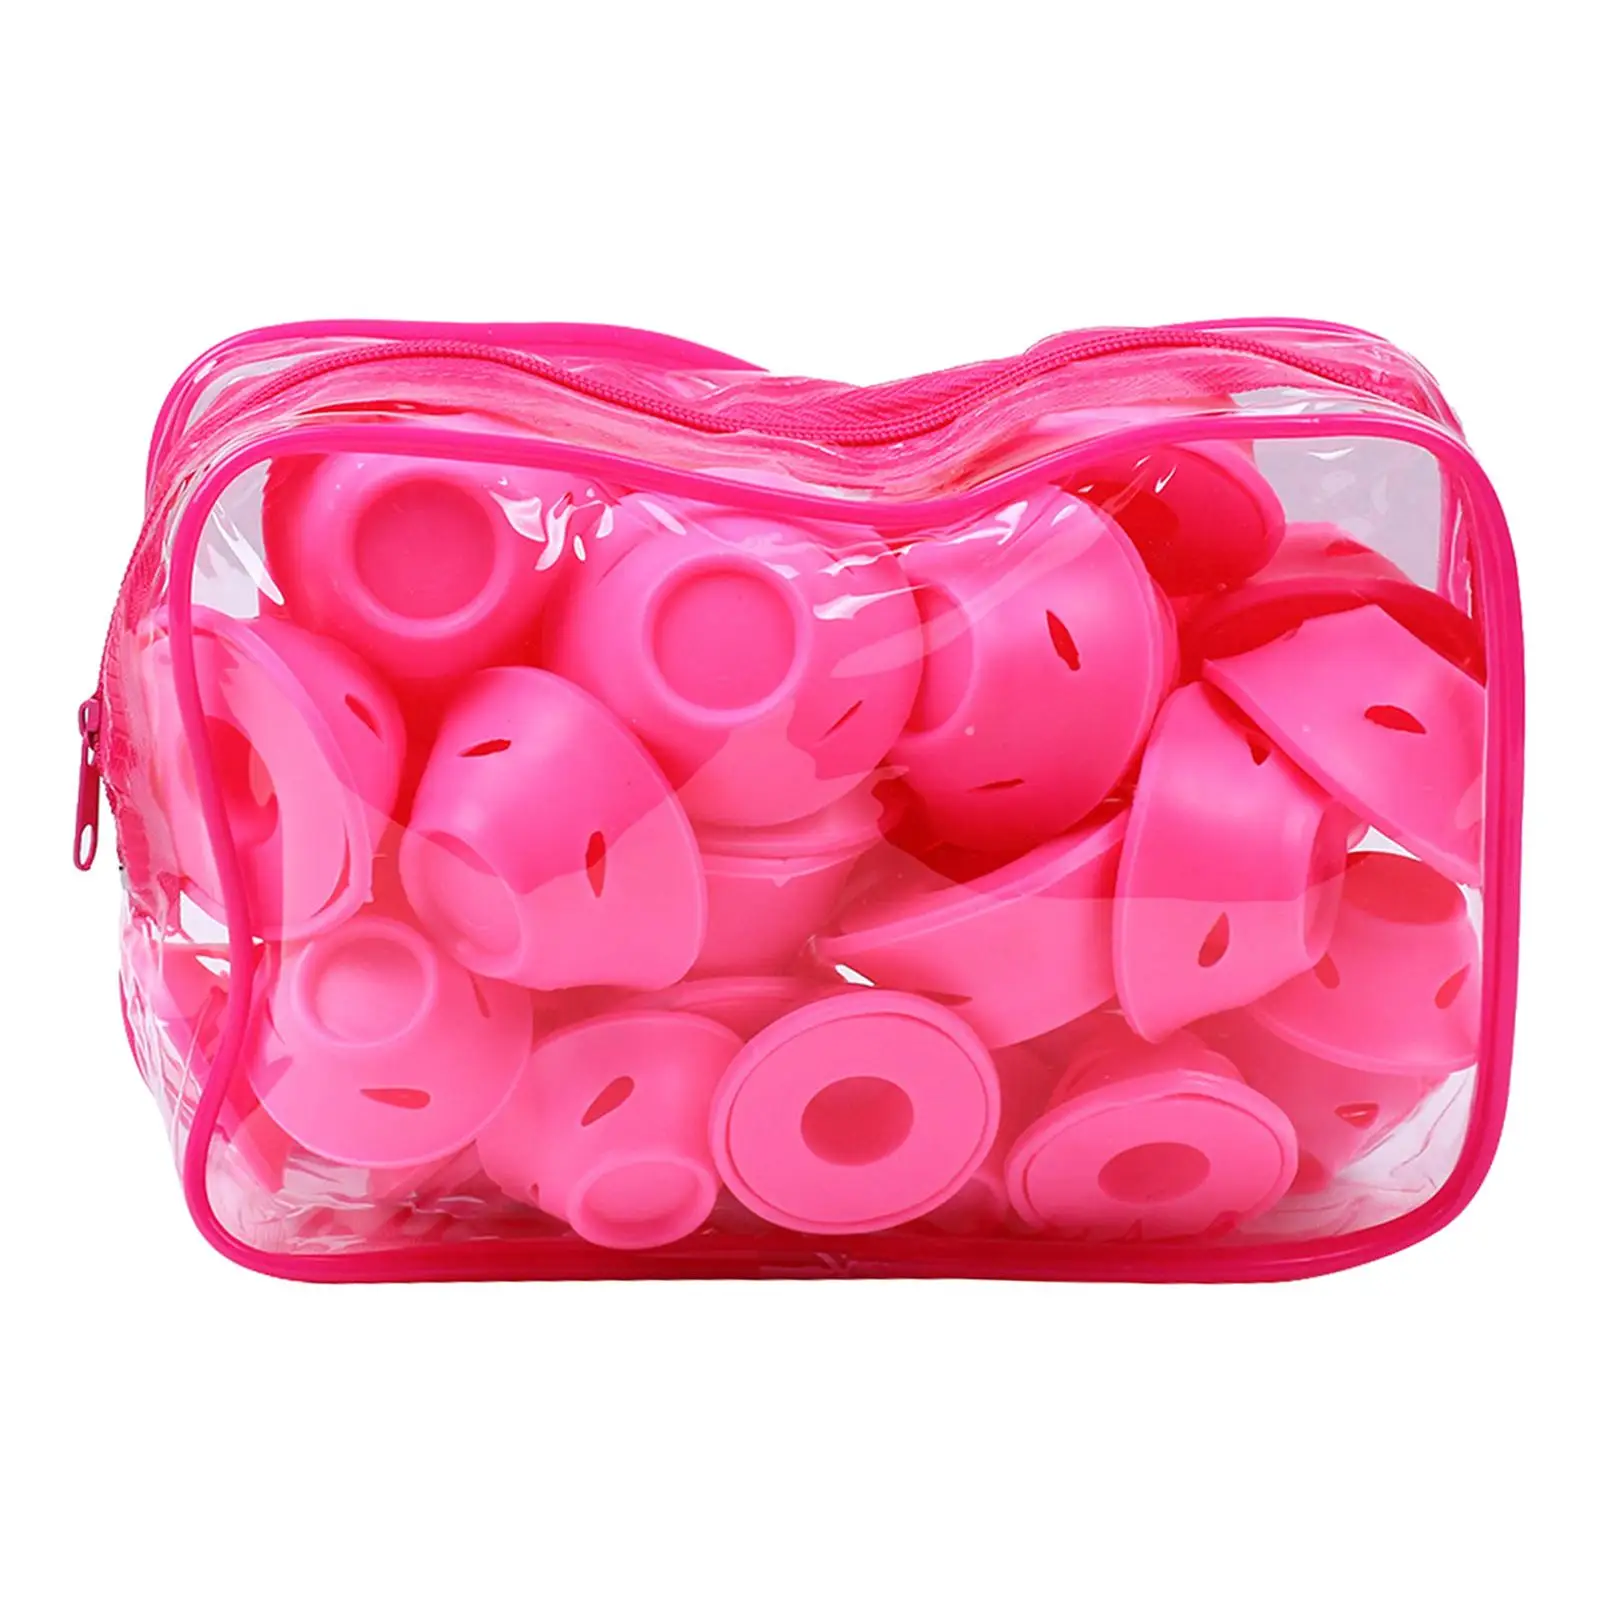 Set of 30 Hair Rollers Soft Hair Accessories Silicone Mushroom Design Curling for Women Girl